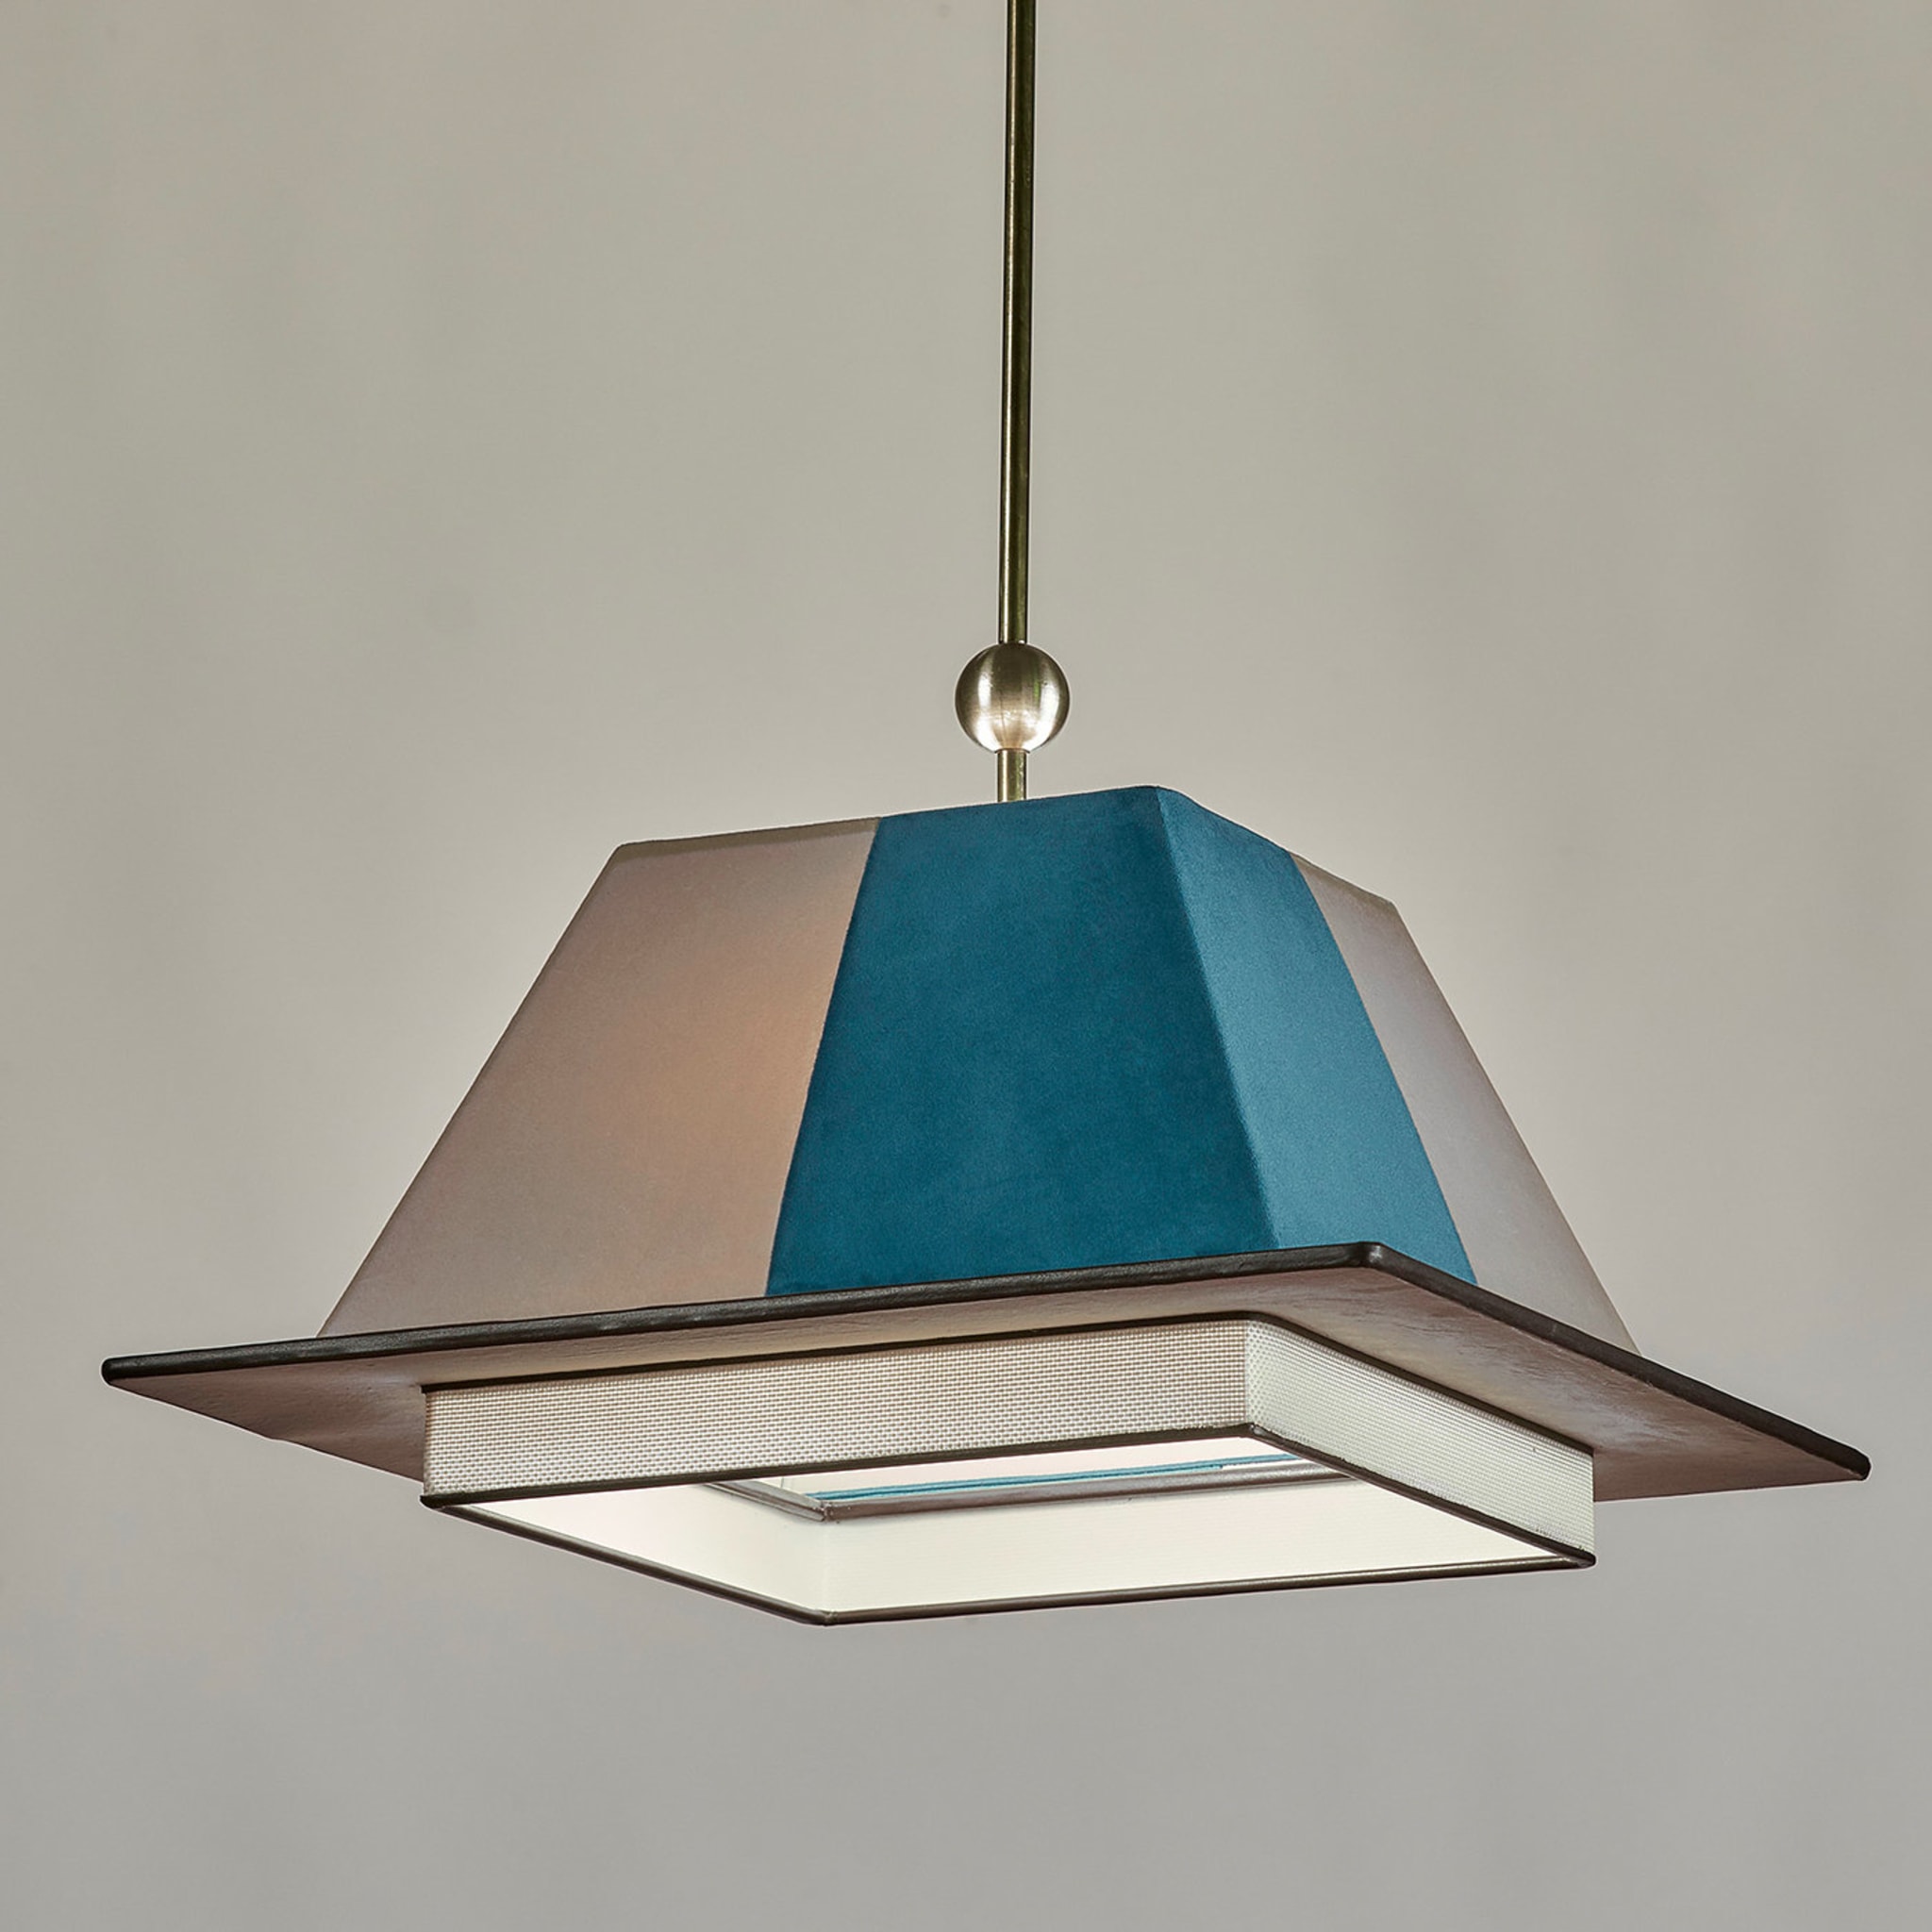 Il Tocco Ice Blue and Sand Pendant Light - Alternative view 2